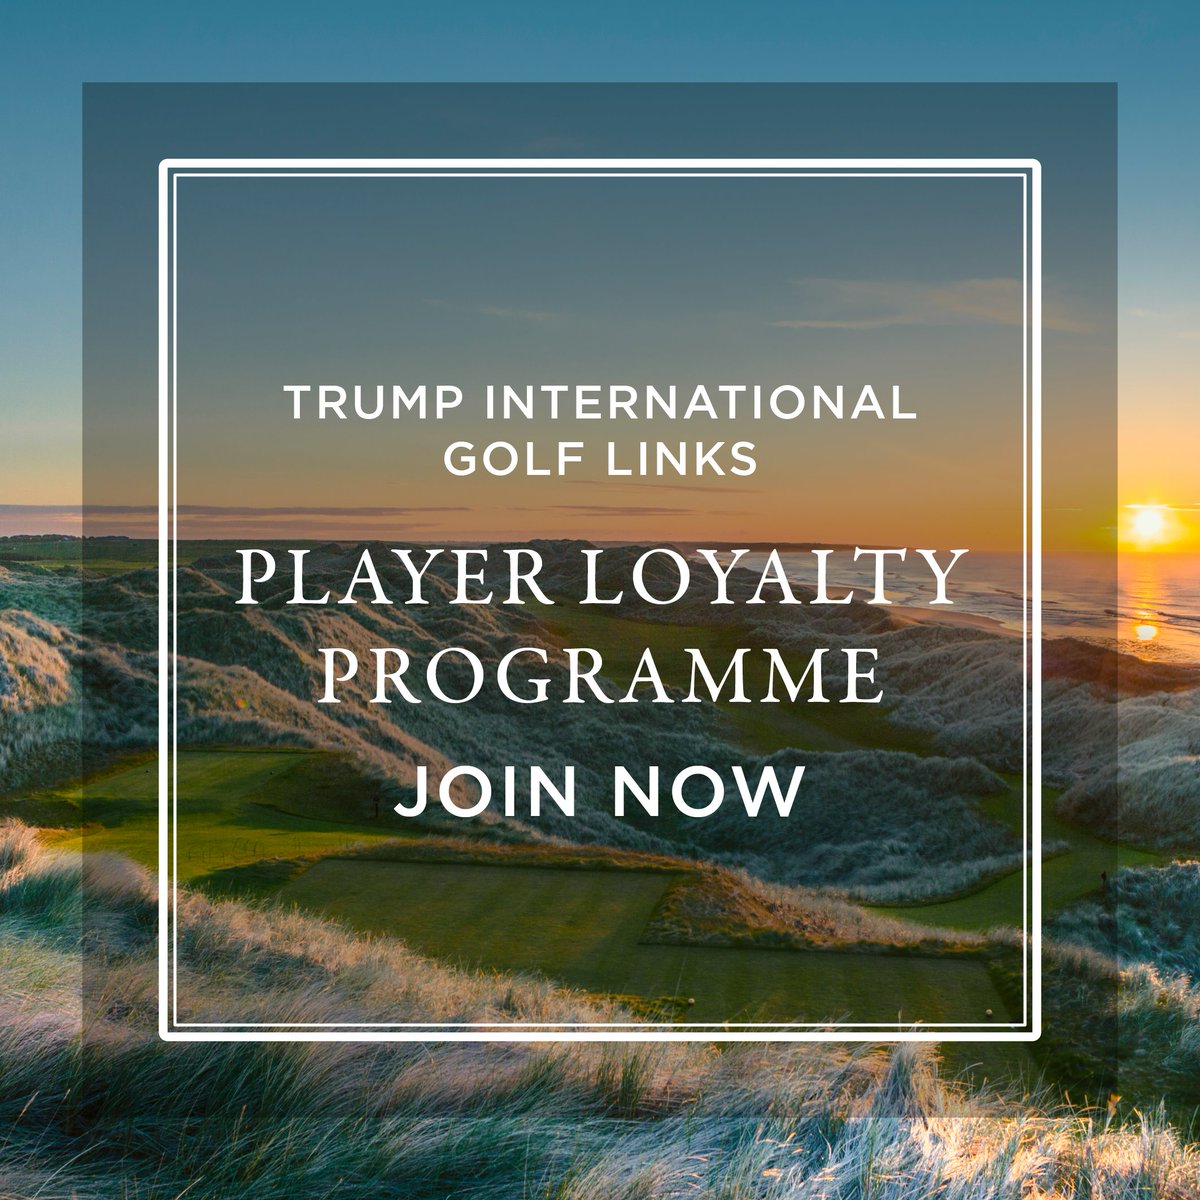 TRUMP INTERNATIONAL PLAYER LOYALTY PROGRAMME Available for UK and Scottish residents Register here: hubs.ly/Q02mTcs80 Play the Championship links course between Monday and Thursday and get 5% discount when you book online. Offer ends March 31, 2024. USE CODE: 'ROUND5'.